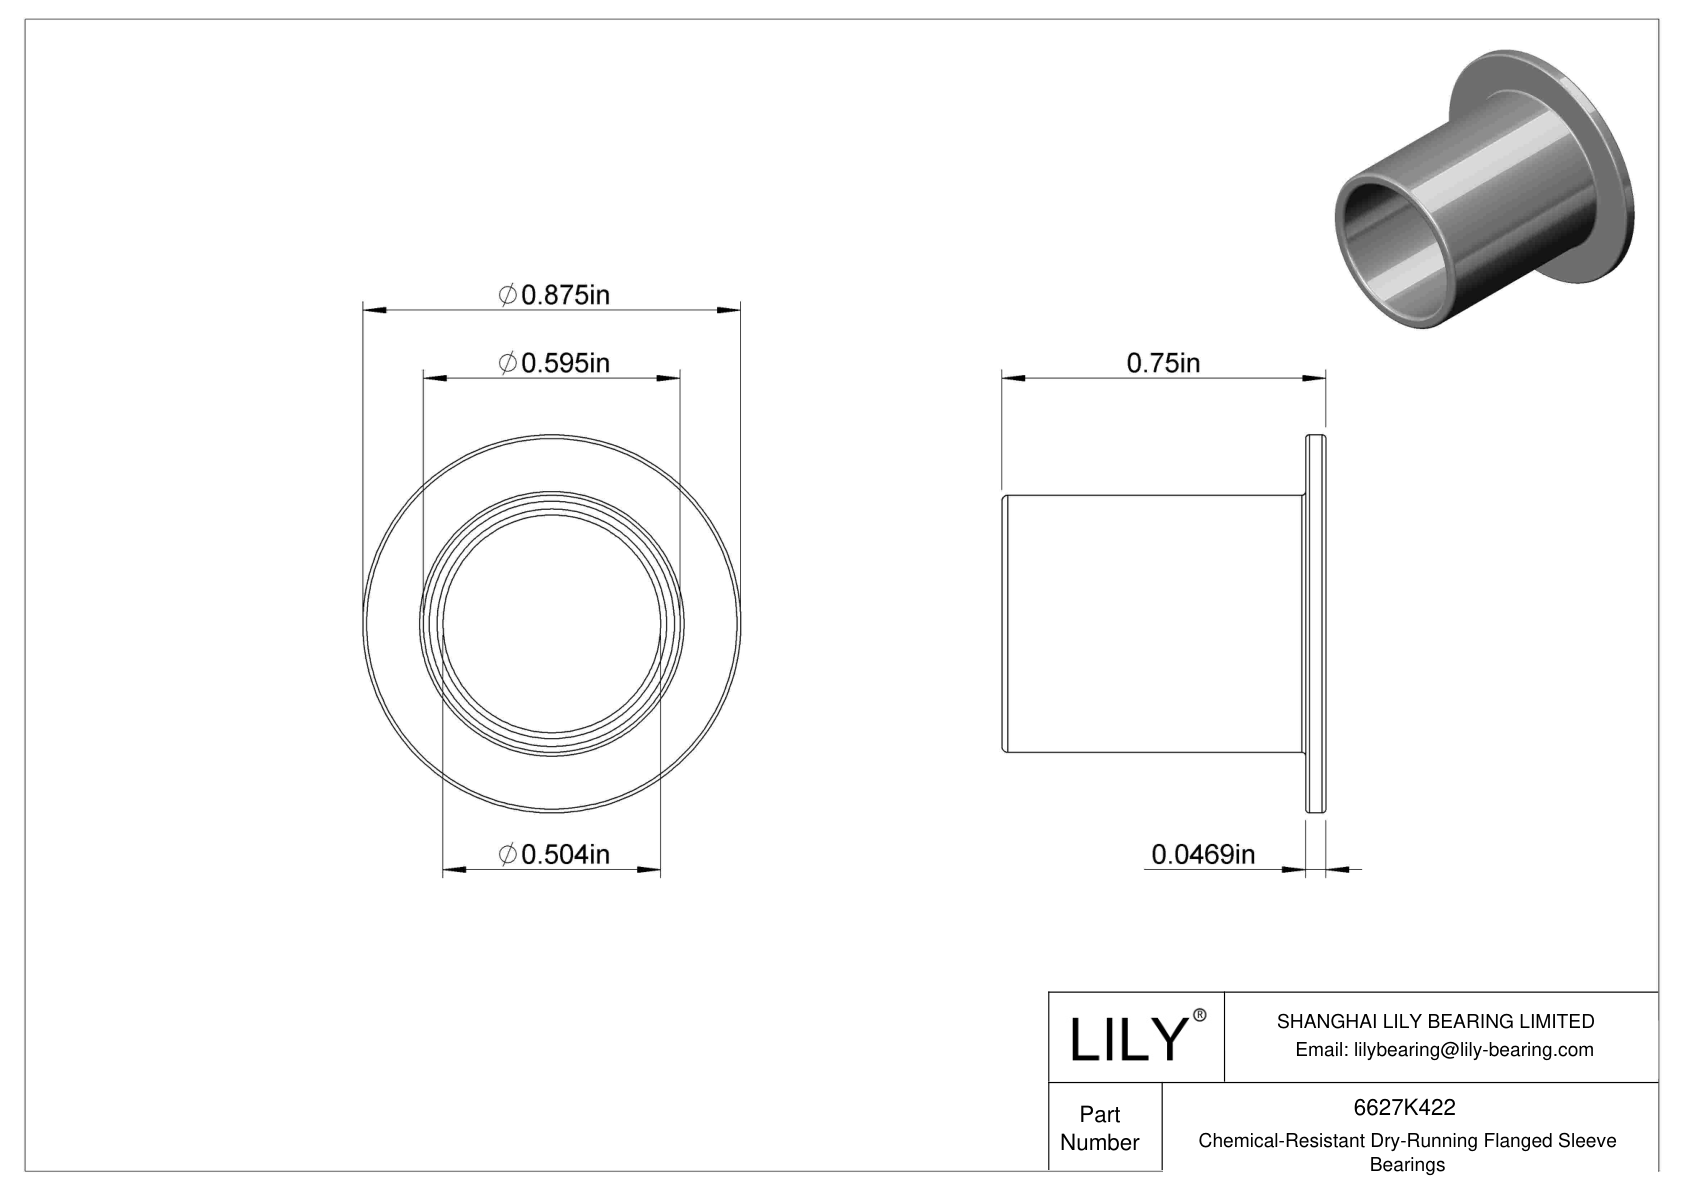 GGCHKECC Chemical-Resistant Dry-Running Flanged Sleeve Bearings cad drawing